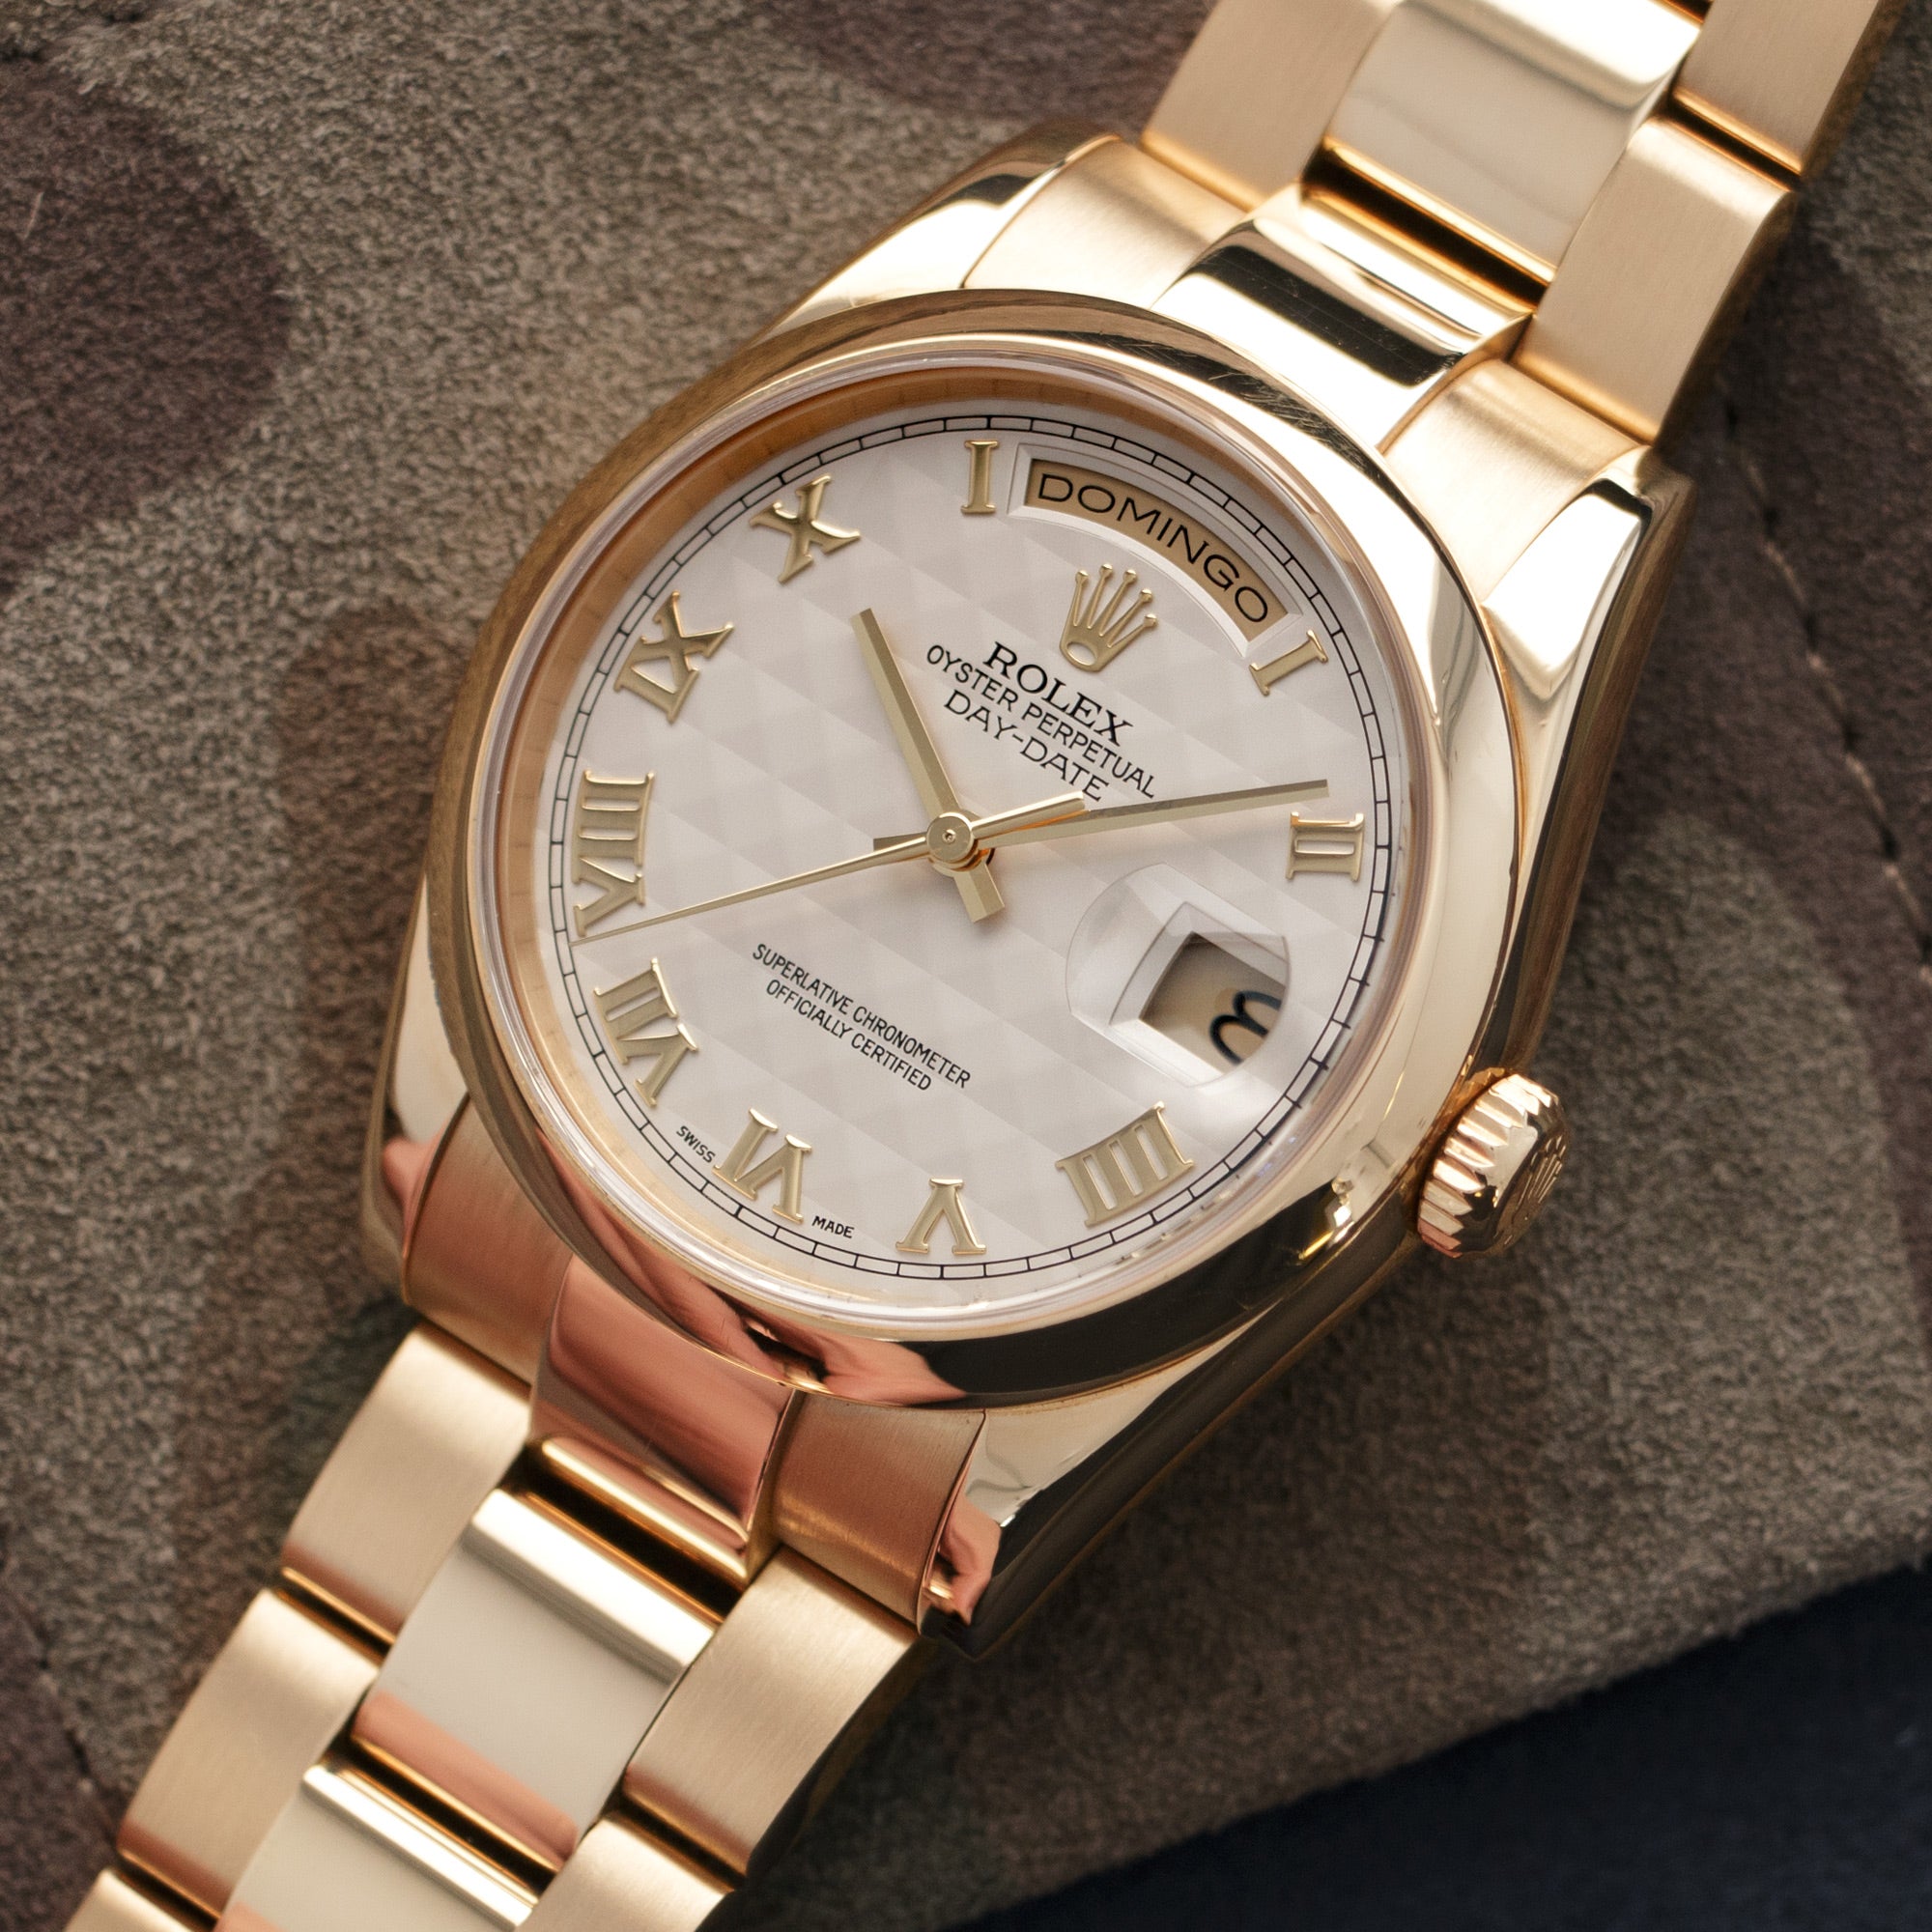 Rolex - Rolex Yellow Gold Day-Date Pyramid Dial Watch, Ref. 118208 - The Keystone Watches